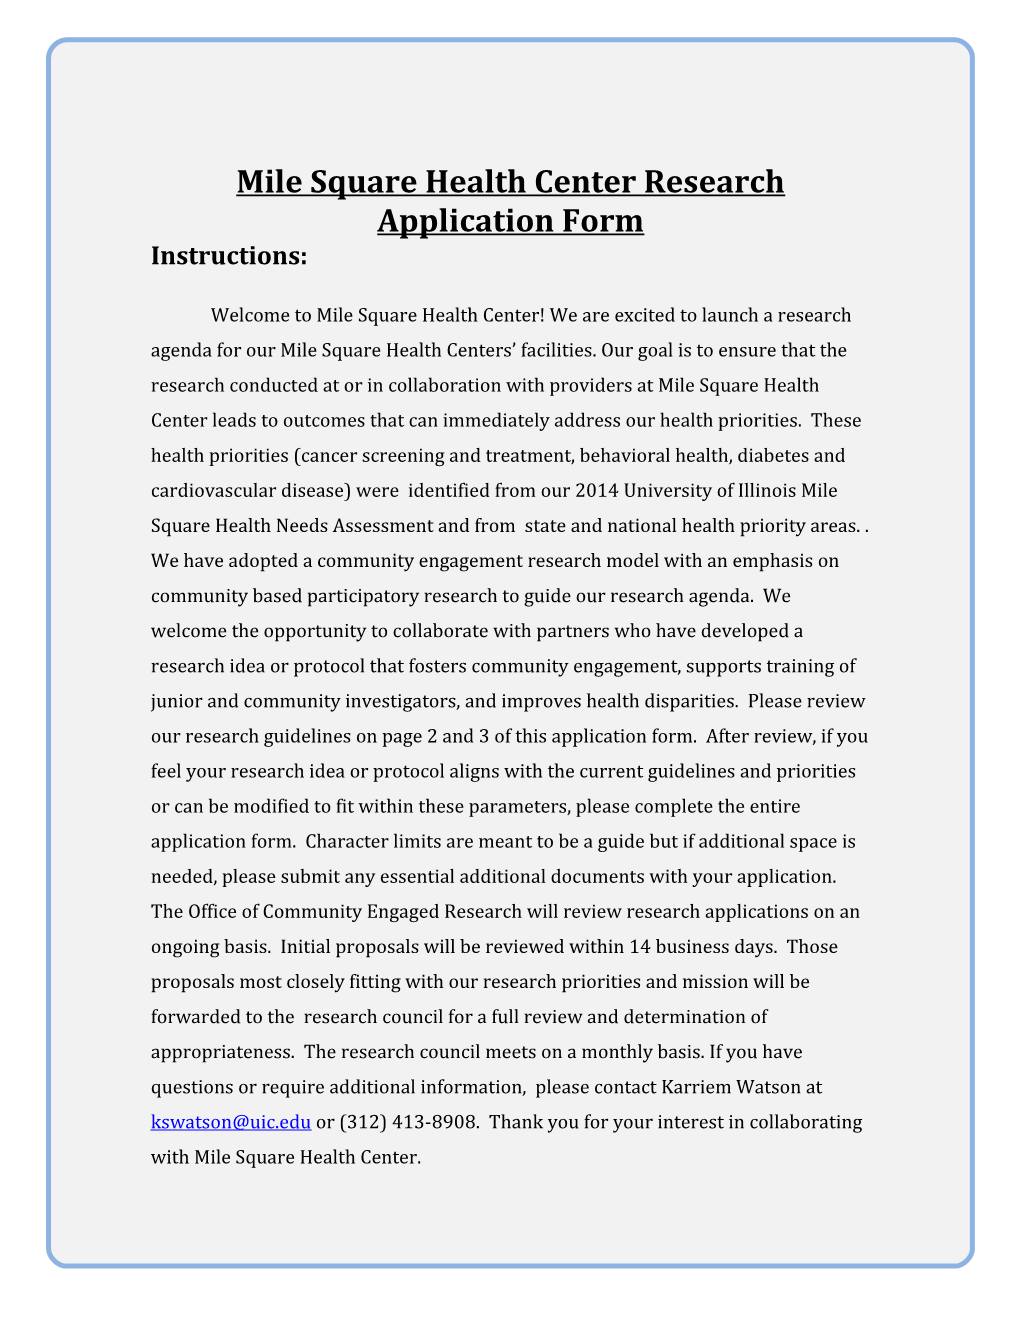 Mile Square Health Center Research Application Form